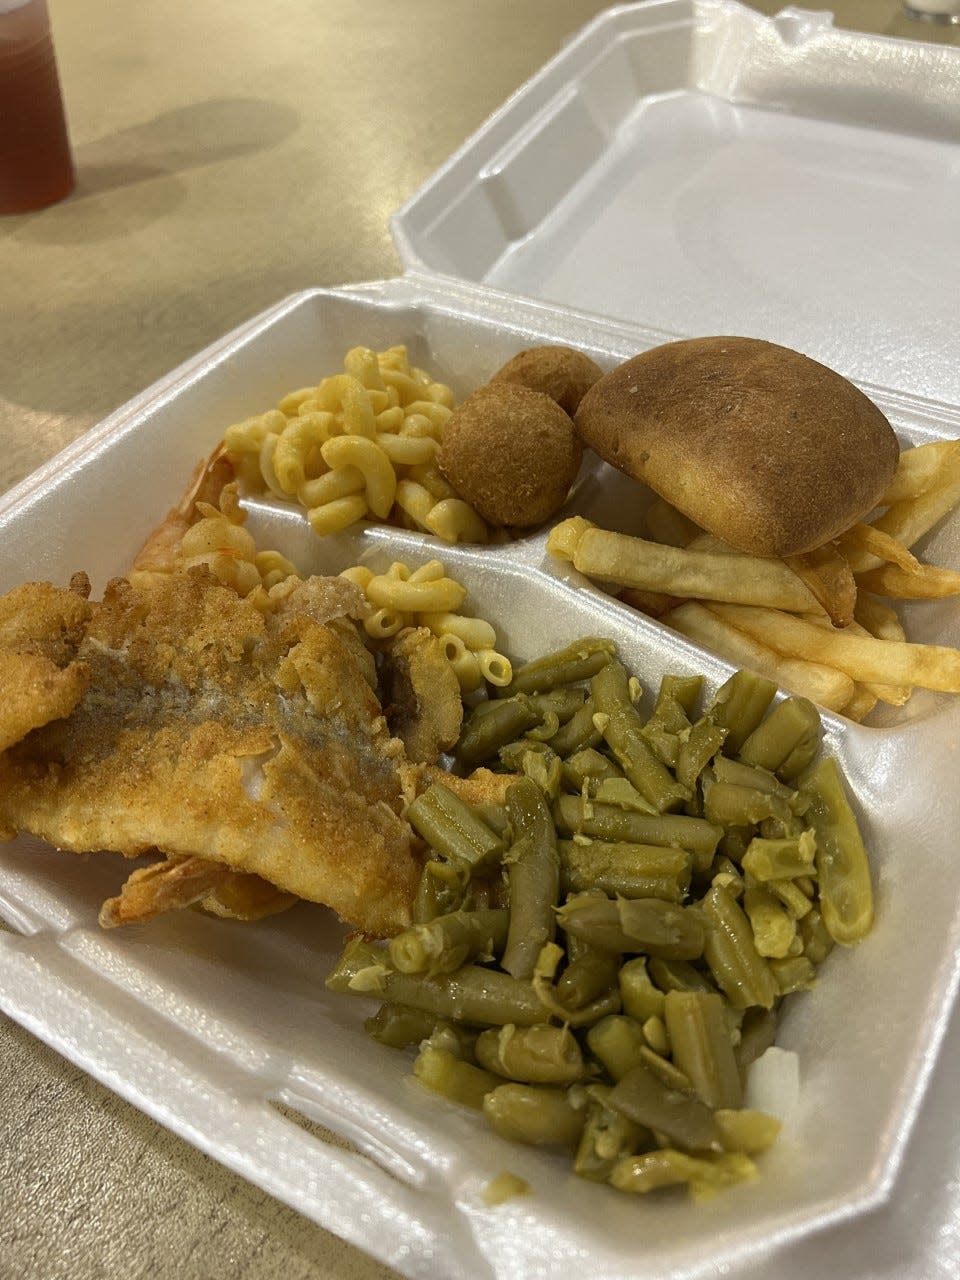 Assumption Catholic Church in San Marco hosted a fish fry on Friday, March 10, sponsored by Men’s Club and Knights of Columbus to benefit Assumption Youth Ministry. The meal, a drink and dessert costed $11. (Photo: Hanna Holthaus / The Florida Times-Union)